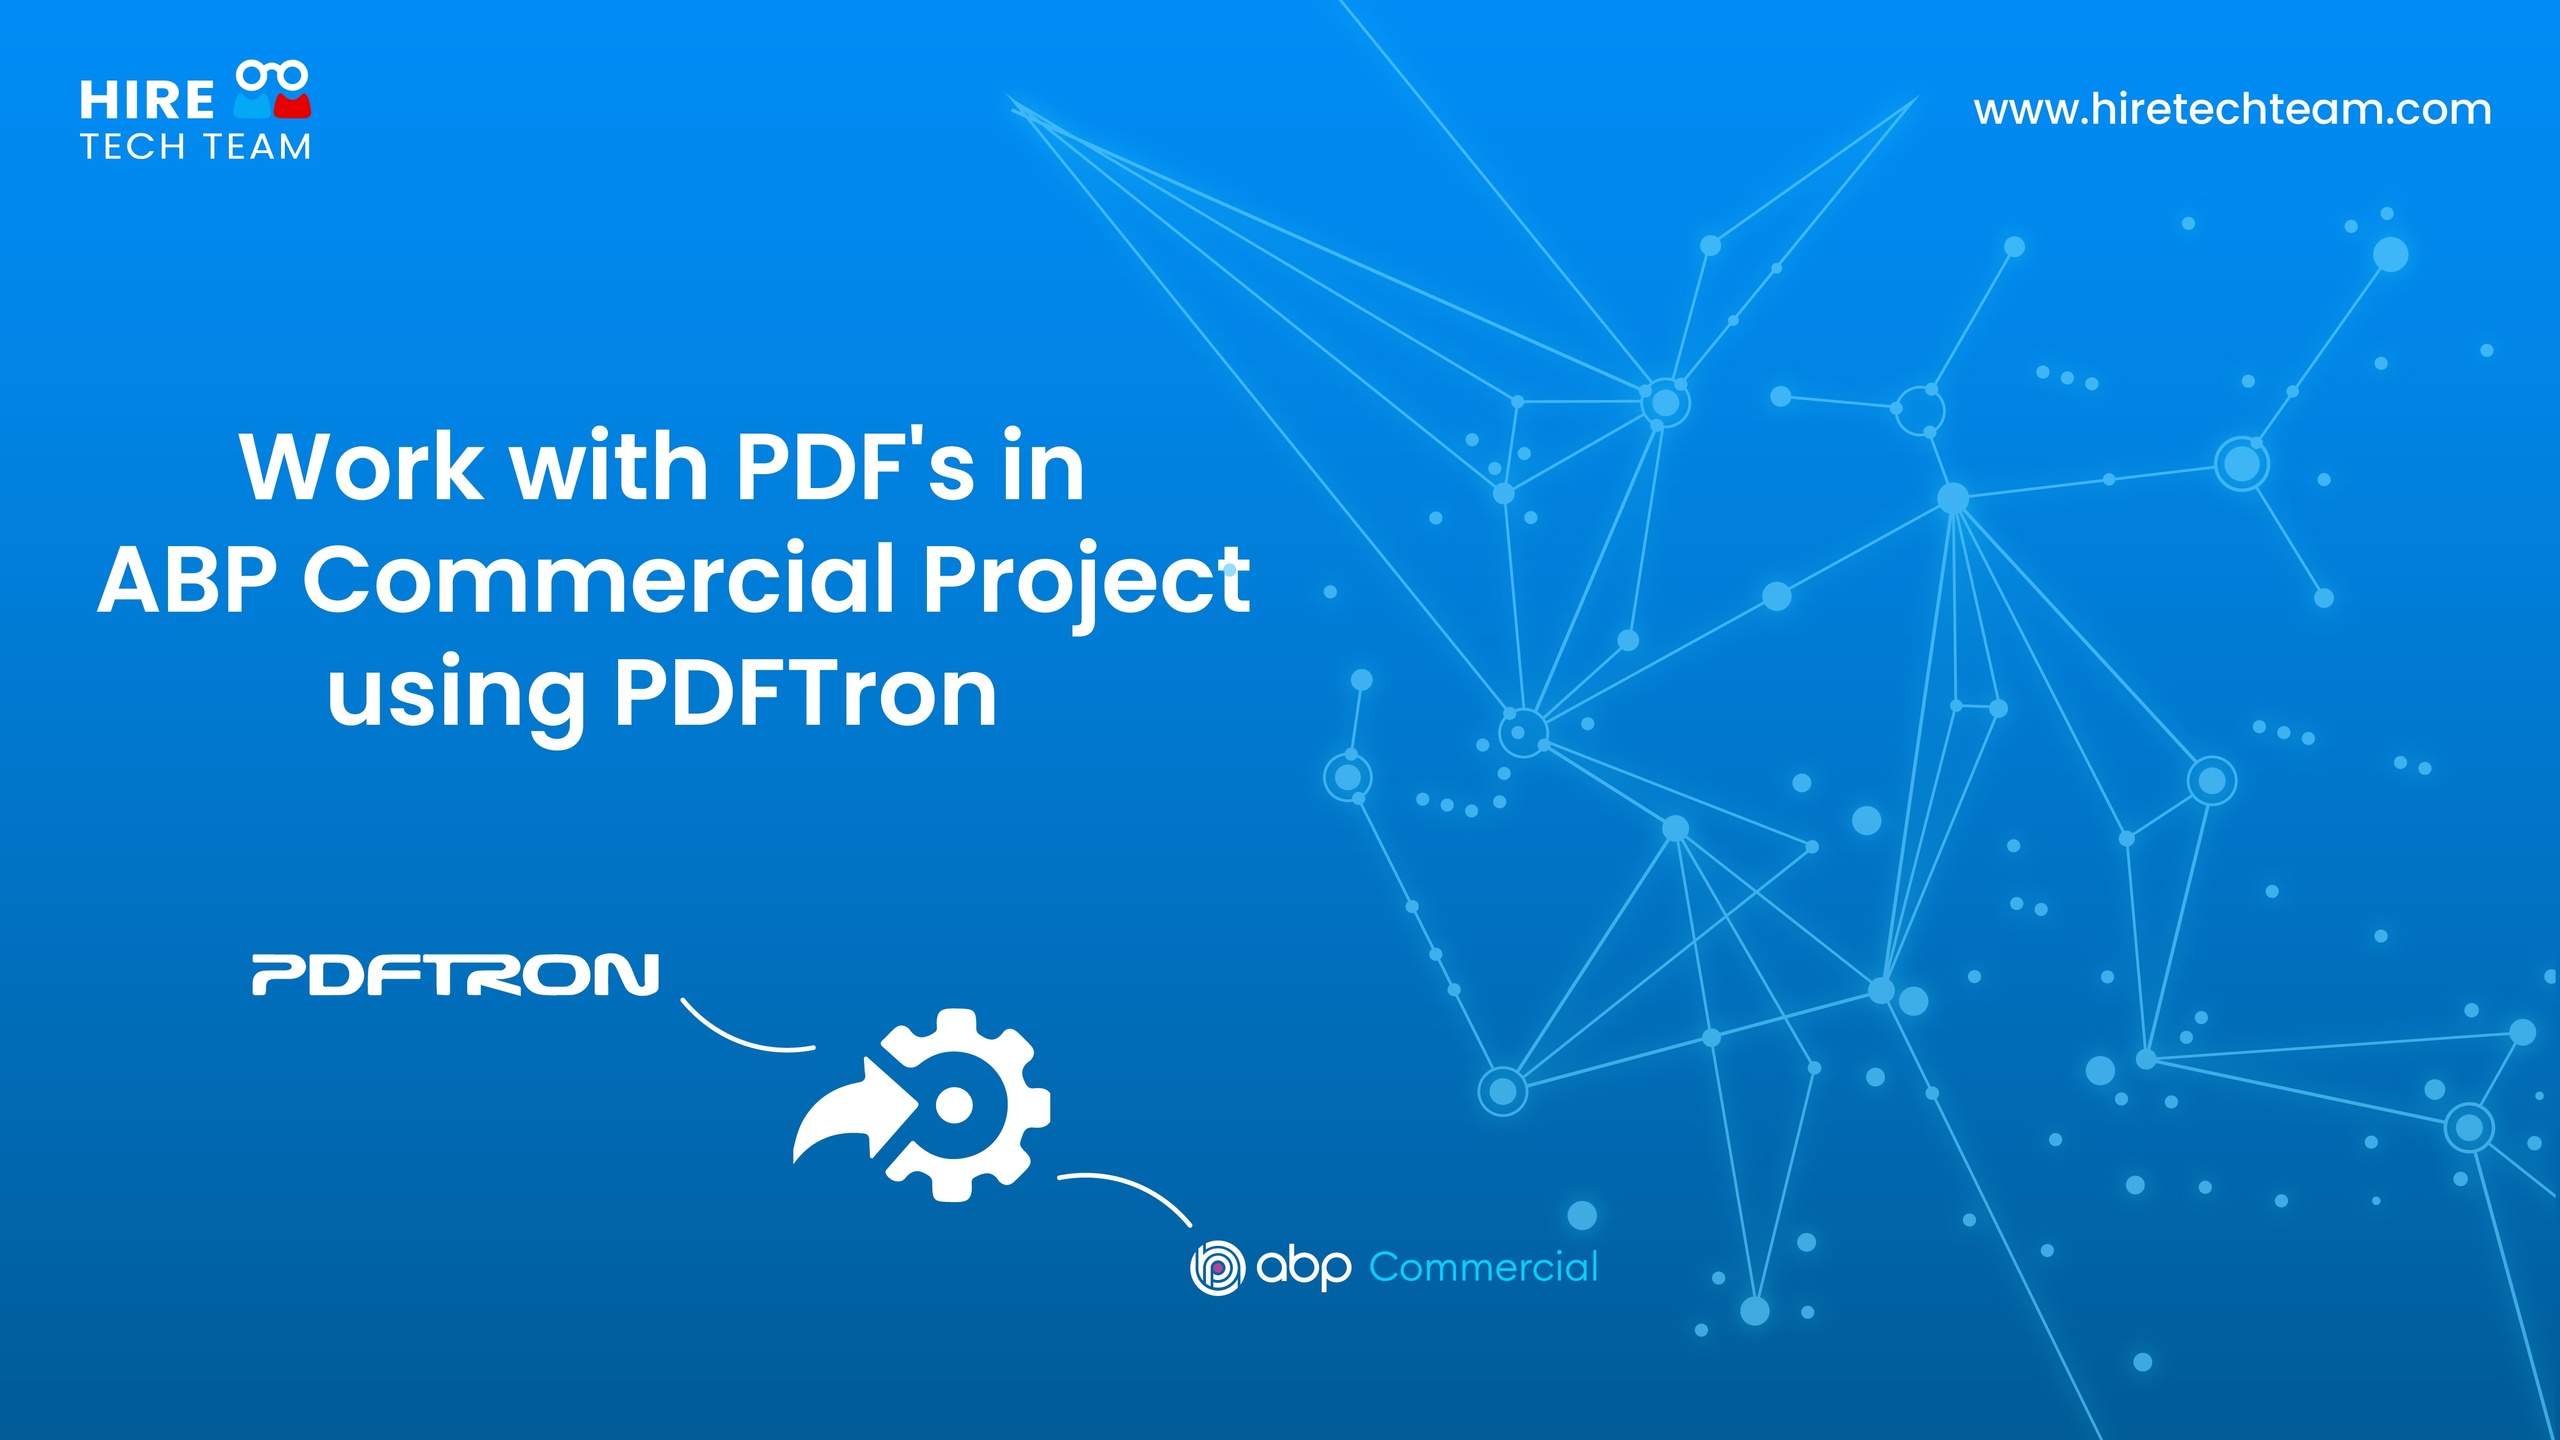 Work with PDF's in ABP Commercial Project using PDFTron